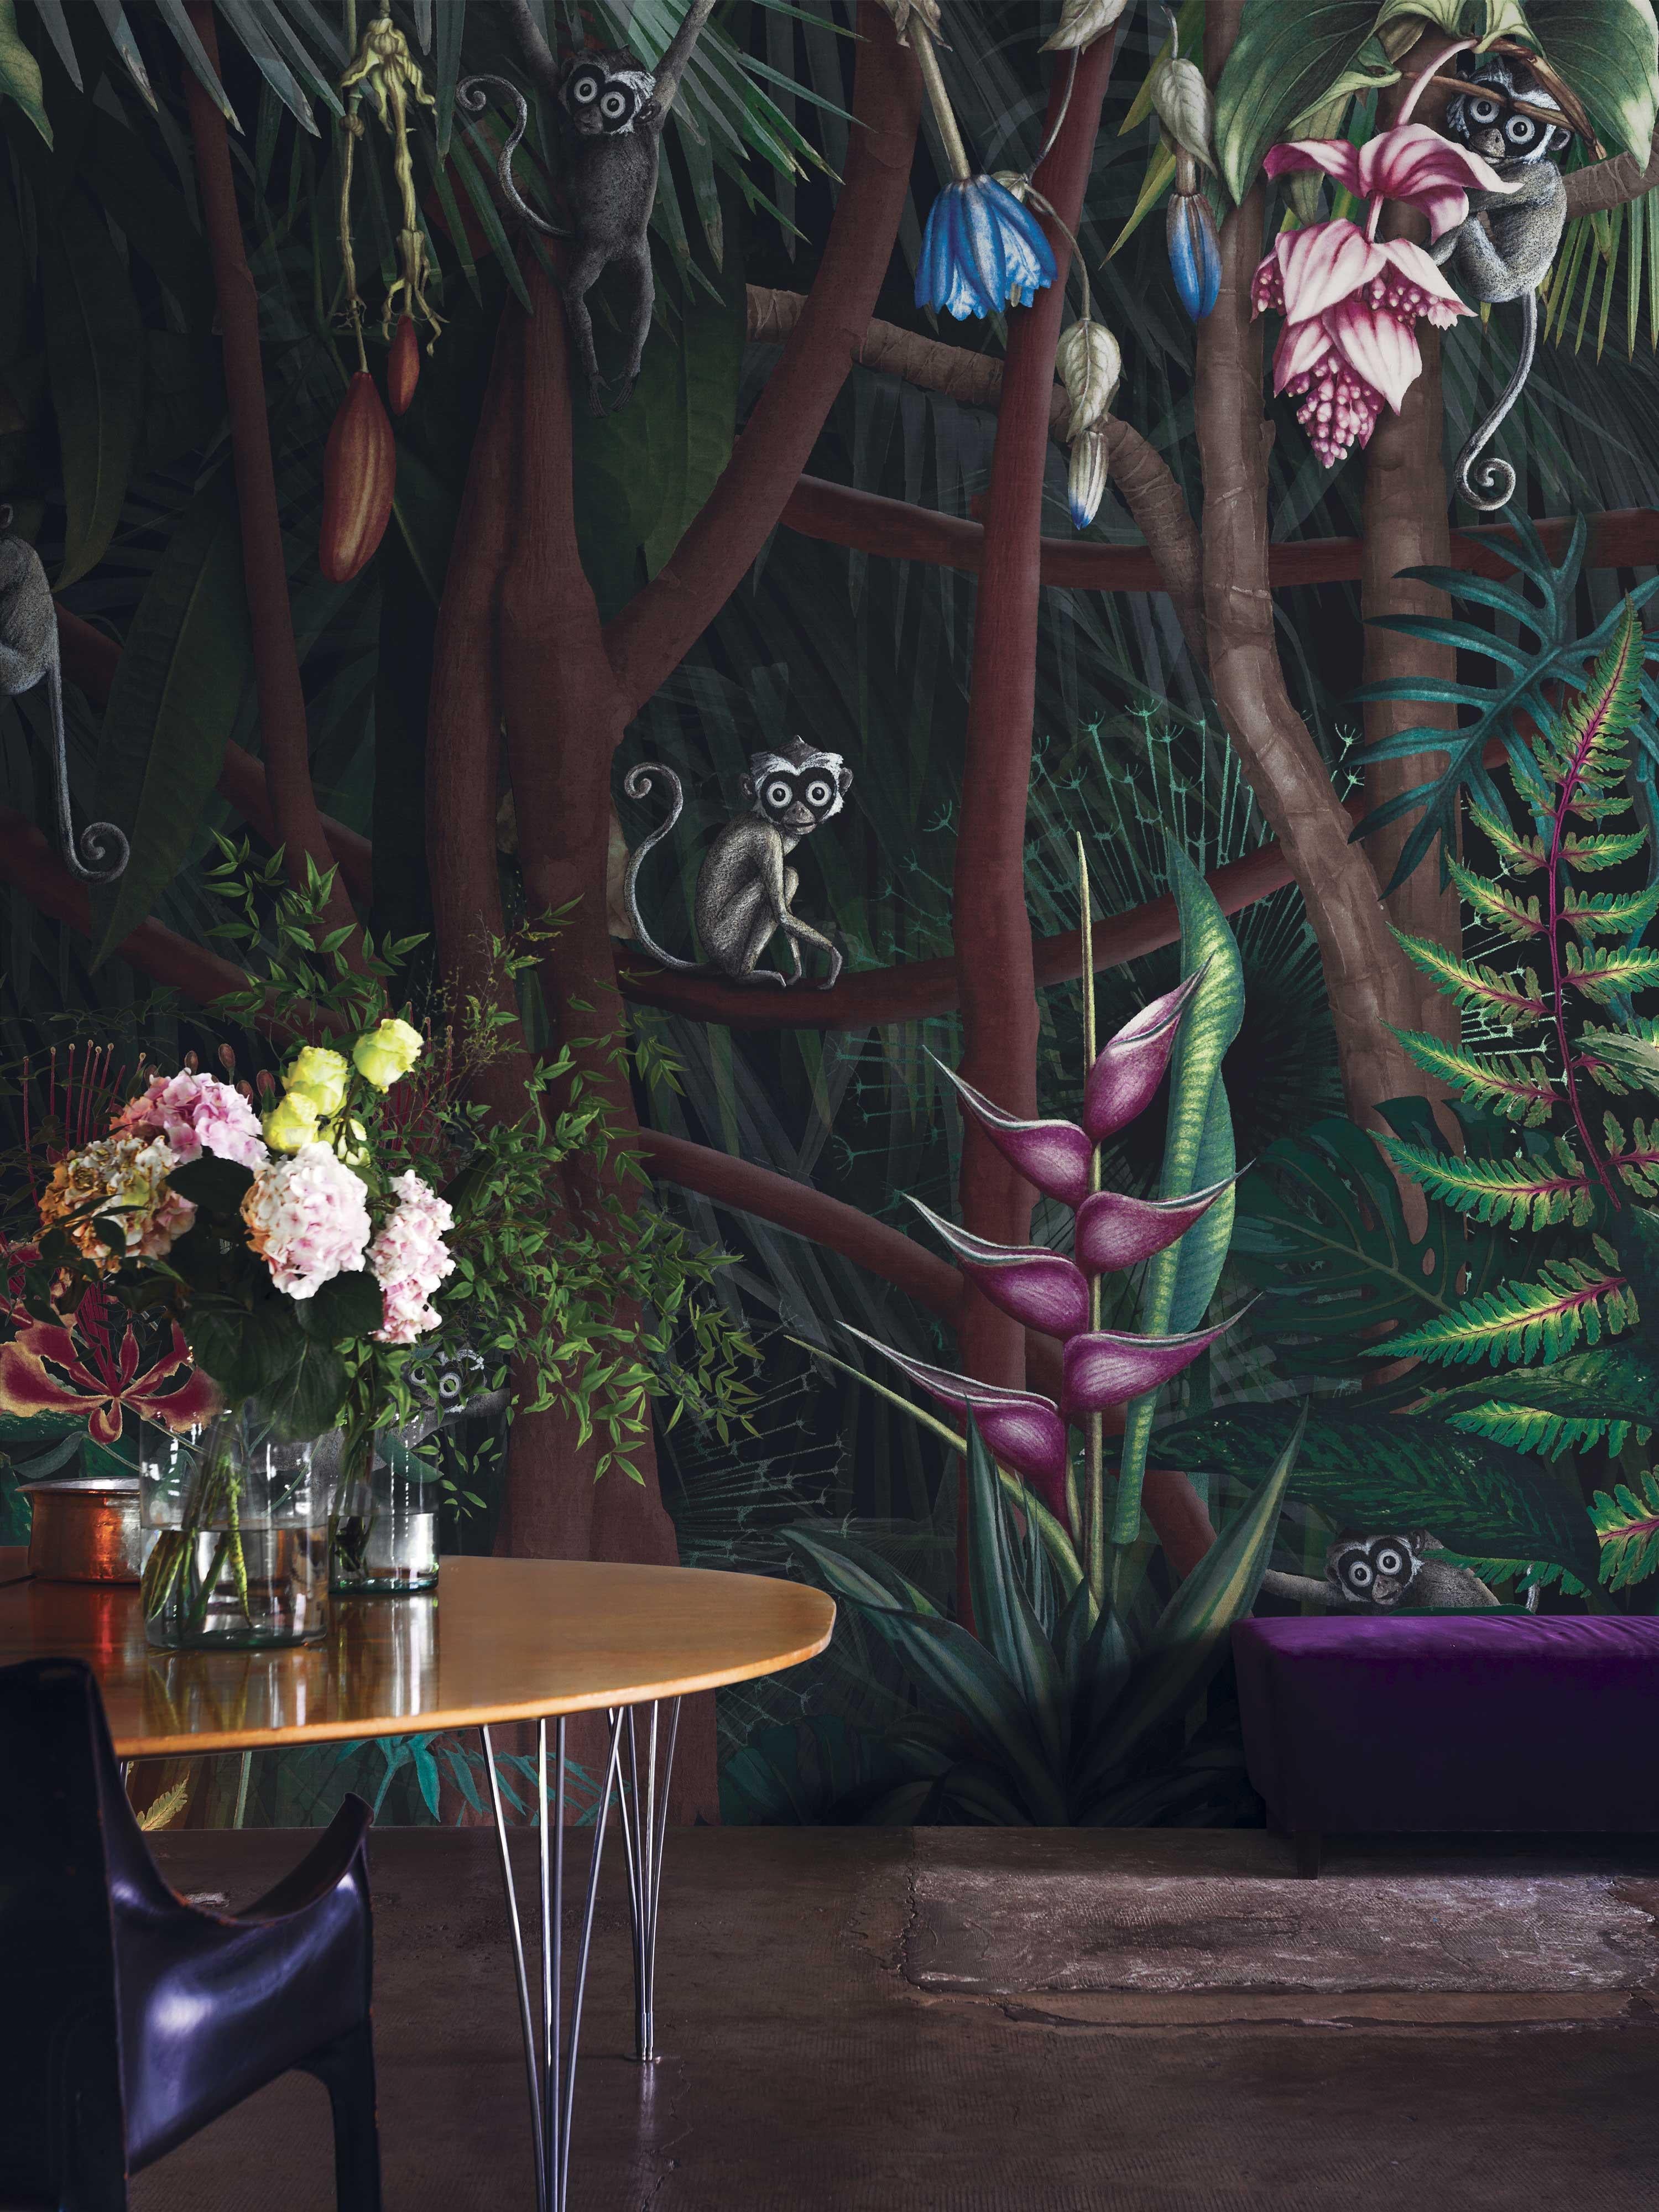 A tropical jungle animated by lemurs that observe the viewer with a careful gaze, a landscape capable of decorating and giving a new dimension and perspective to walls, thanks to the dark tones animated by the colourful details of the vegetation.